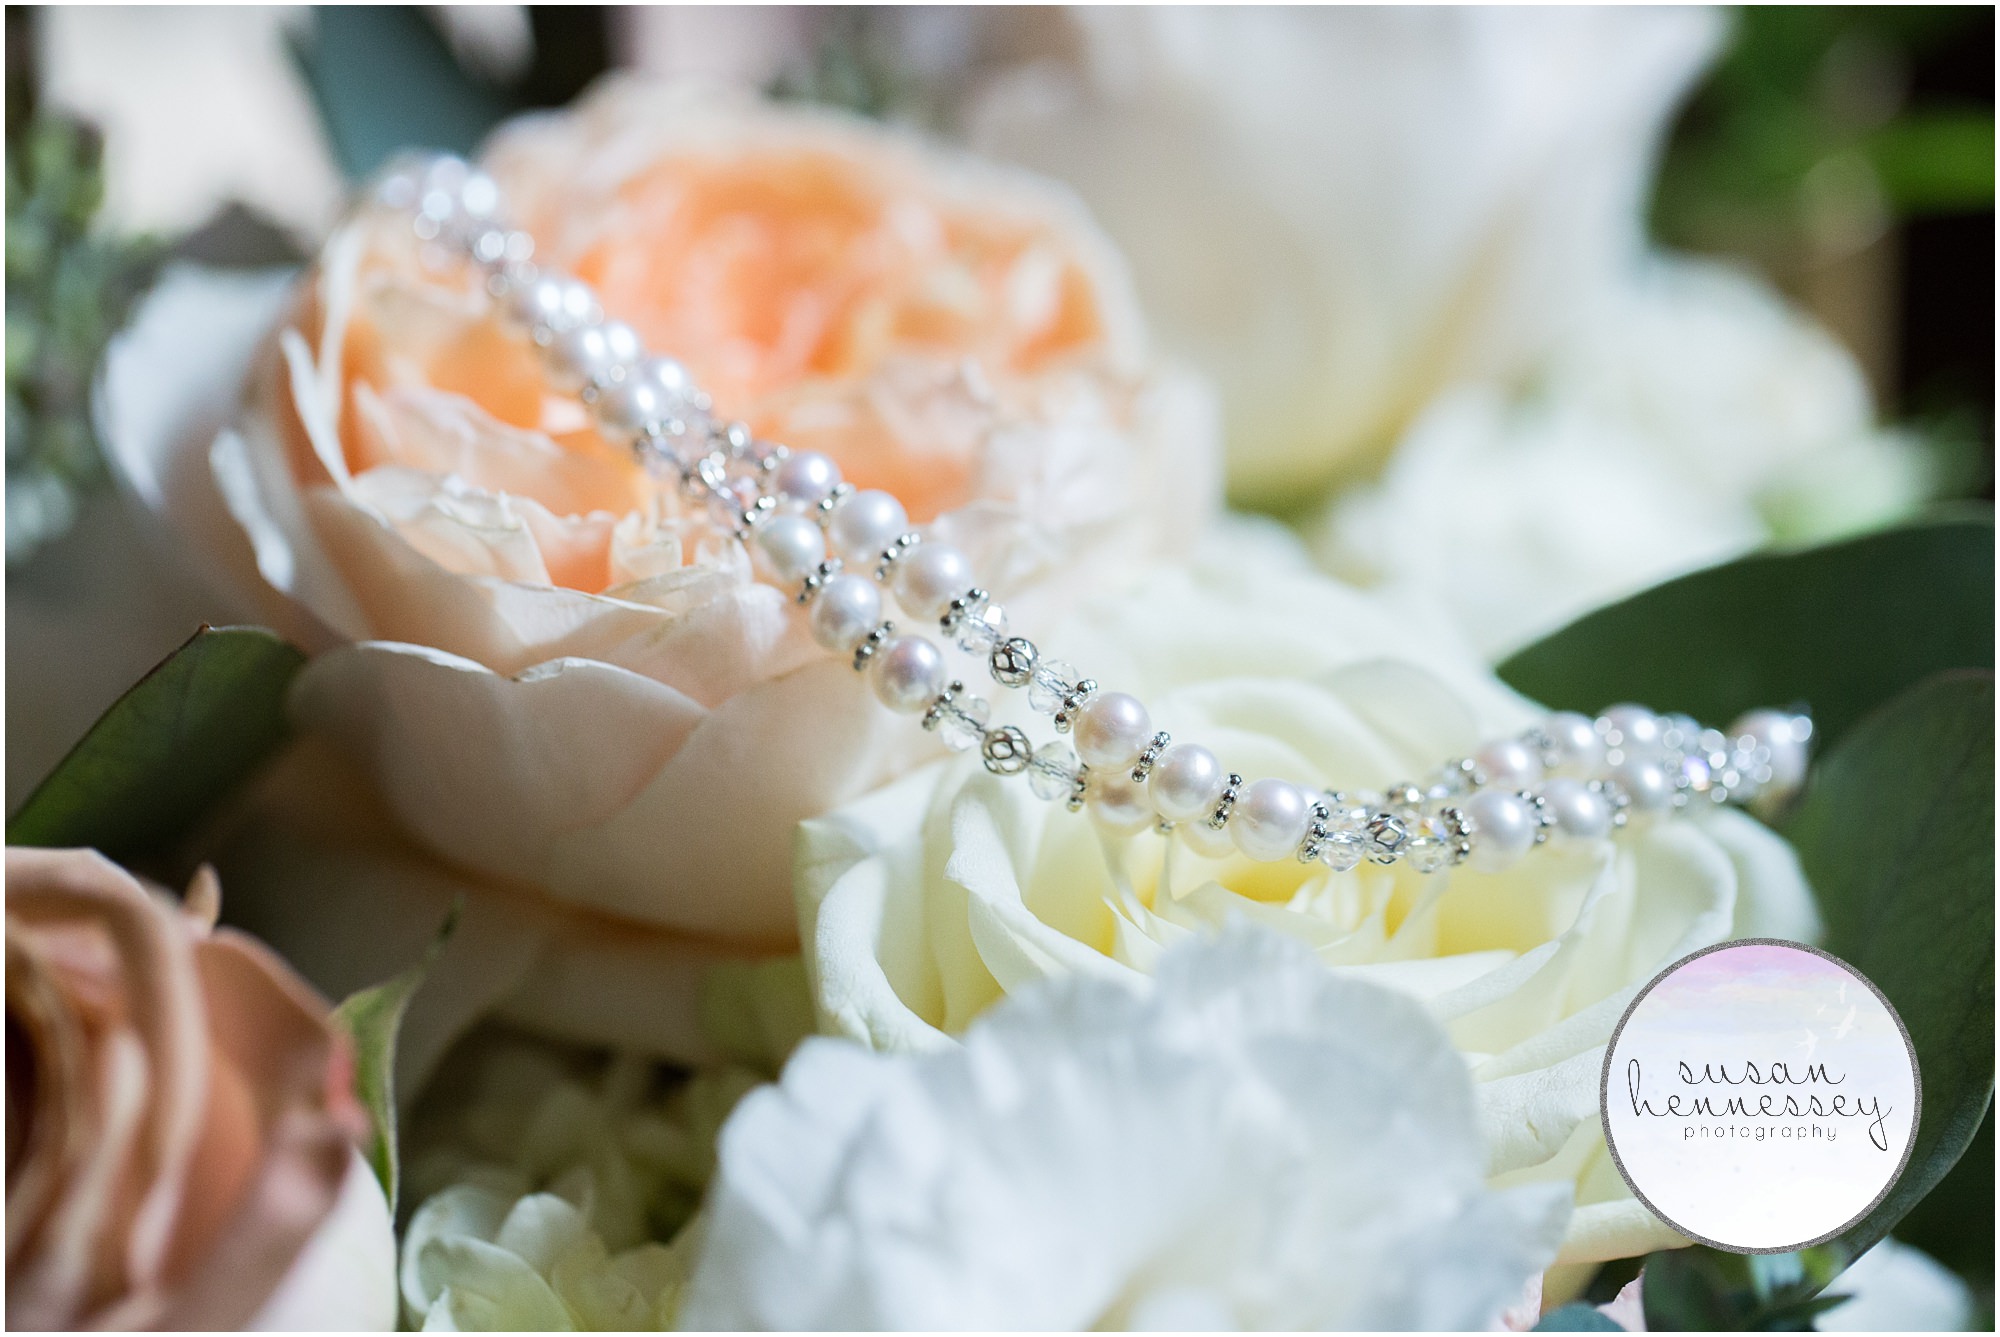 Bride's bracelet and bouquet on wedding day.